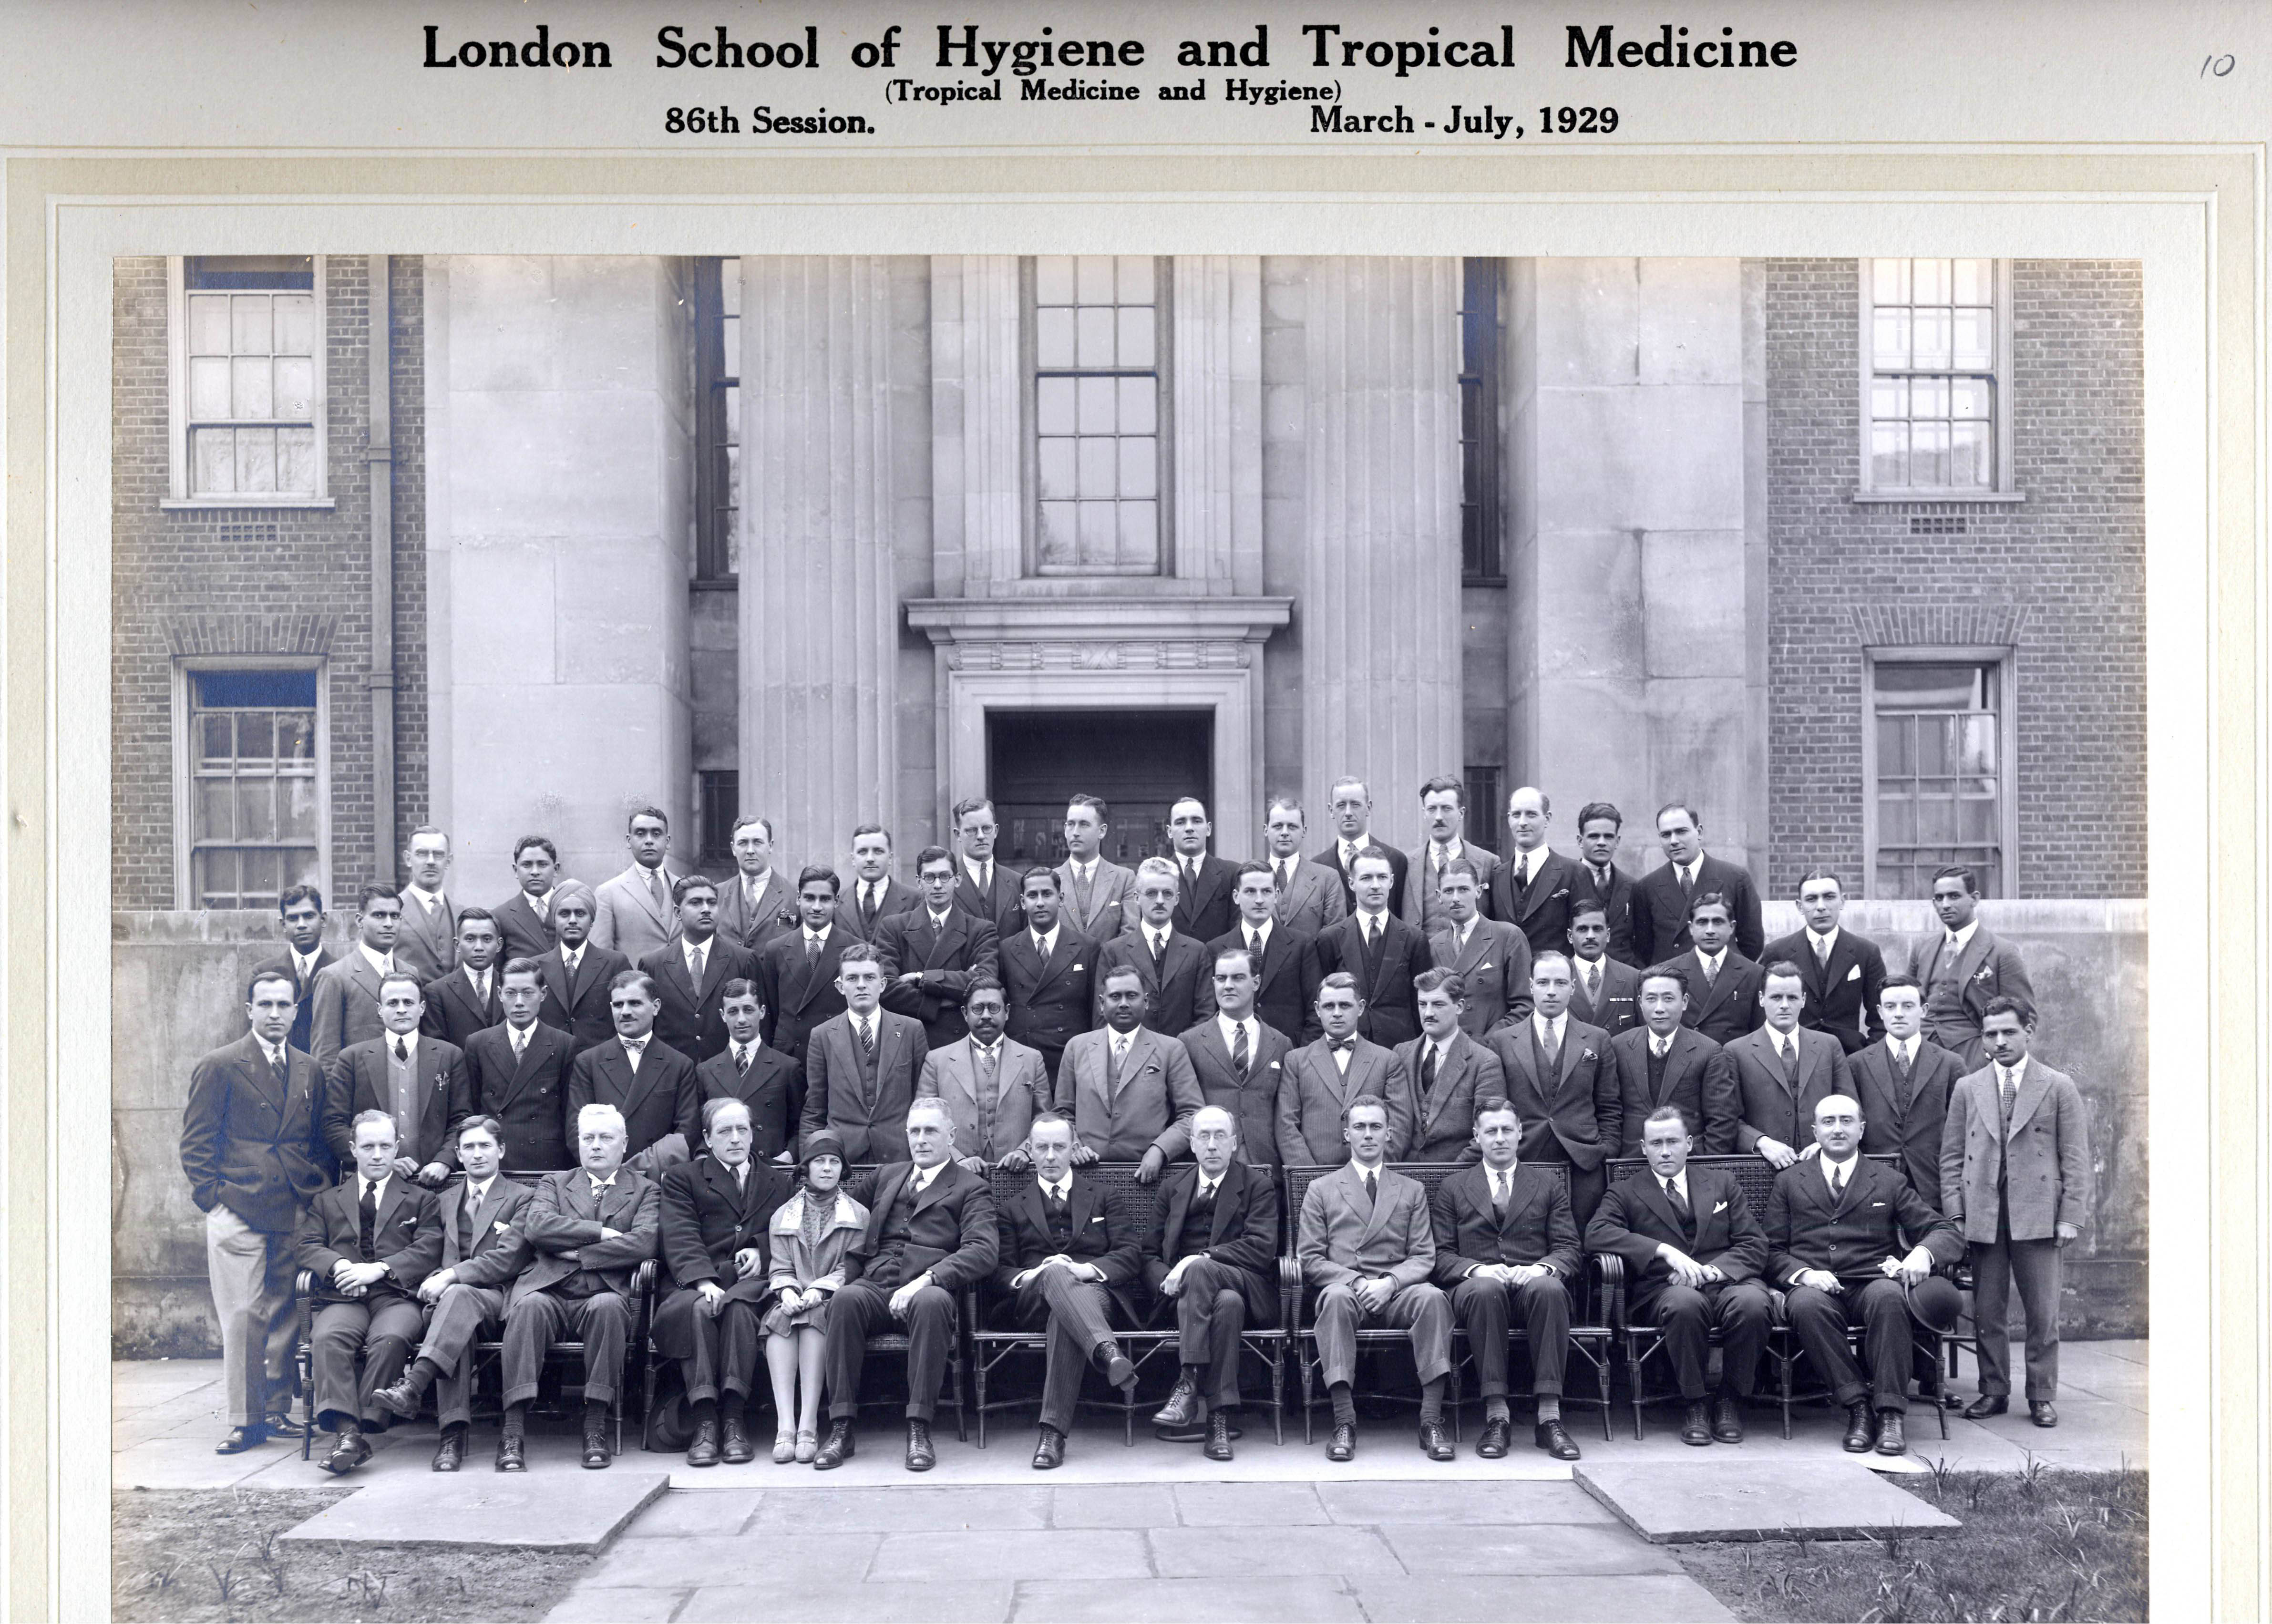 Members of the Diploma in Tropical Medicine and Hygiene course